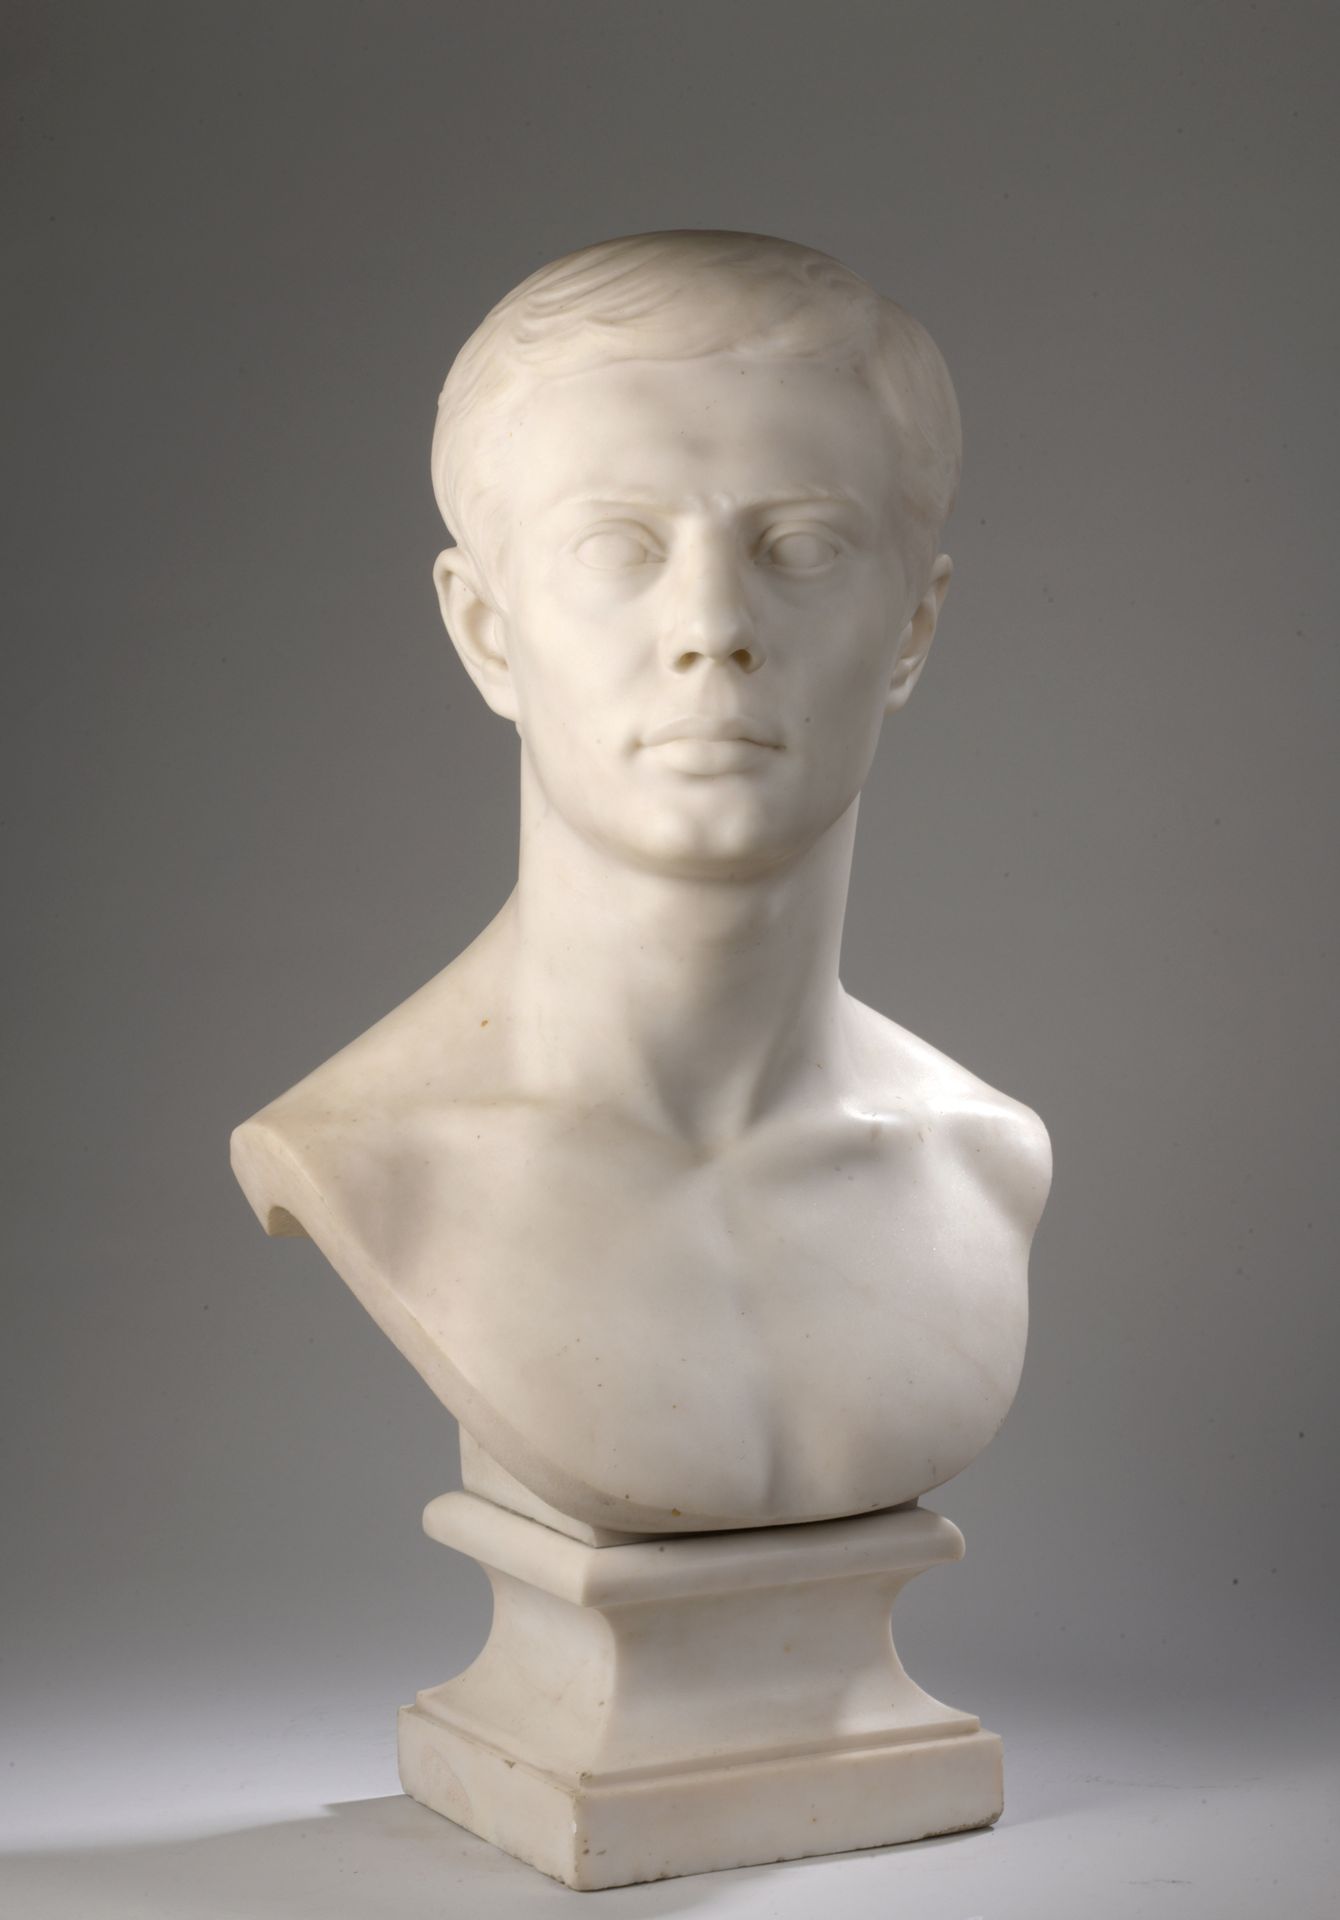 Null Henri Frédéric ISELIN (1825-1905)

Bust of Young Roman or Observation 

Bus&hellip;